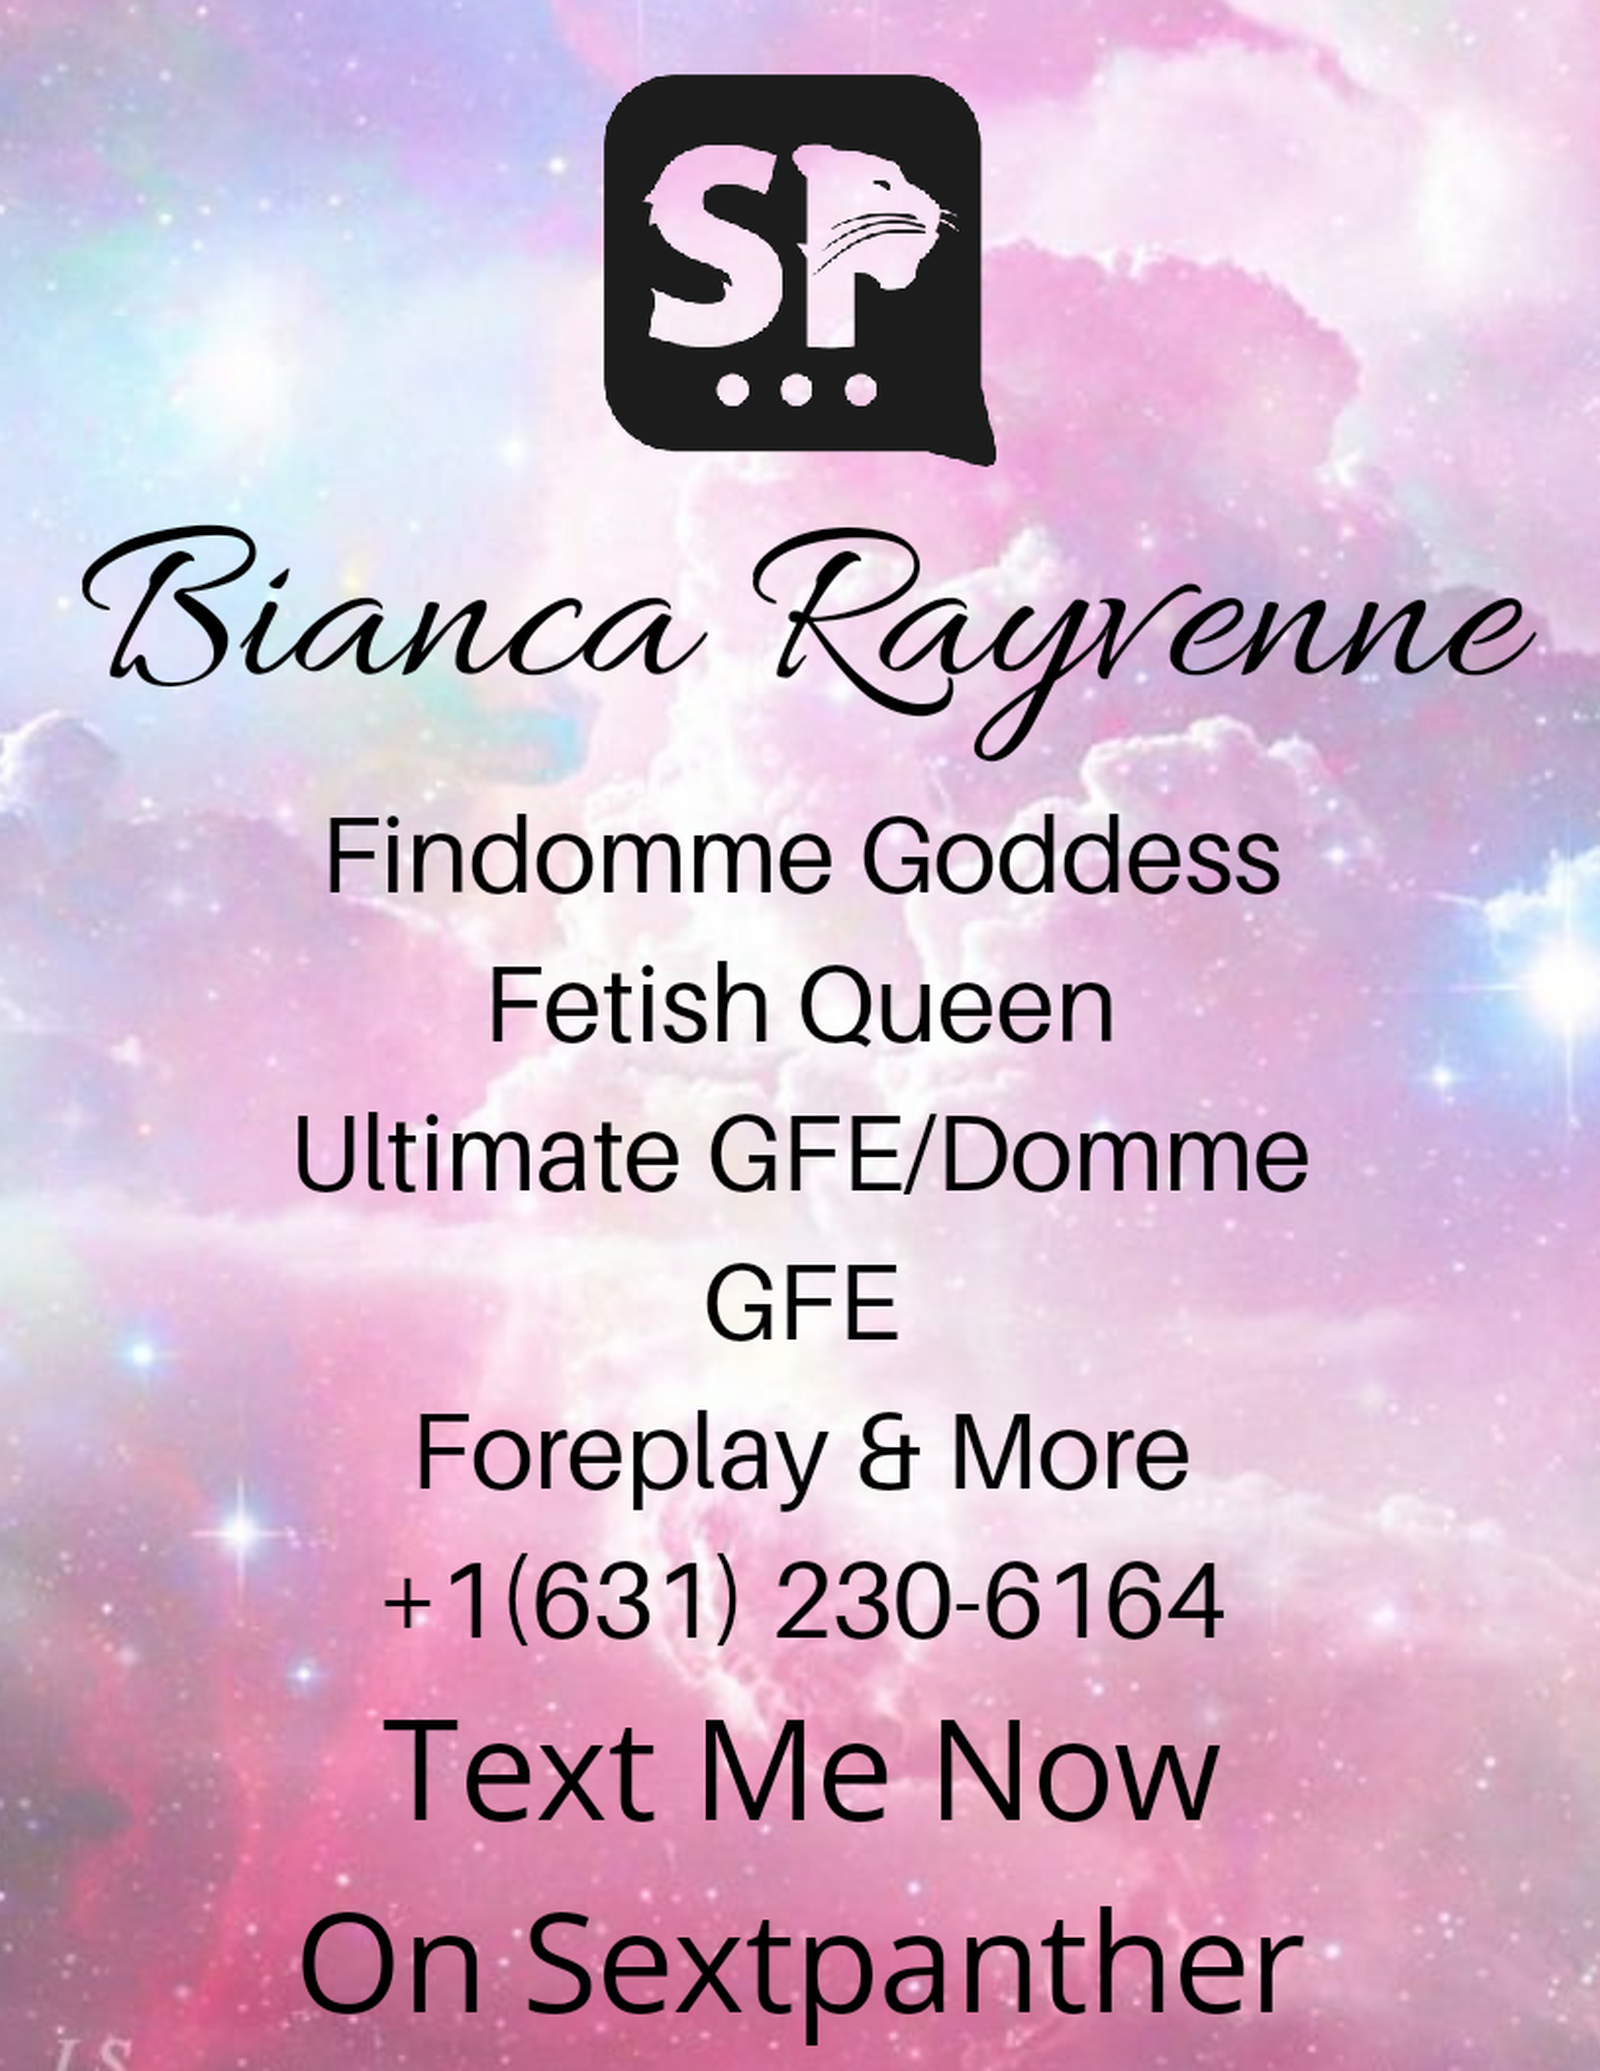 Photo by BiancaRayvenne with the username @BiancaRayvenne, who is a star user,  May 4, 2019 at 5:23 AM. The post is about the topic Findom and the text says 'I am Goddess Bianca Rayvenne.
Im a findomme, bbw, and a nightmare in high heels.

I'm also a foot fetsh queen, a blackmail contractor, and nurturing mommy domme who offers the ultimate Domme girlfriend experience.

Lets play'